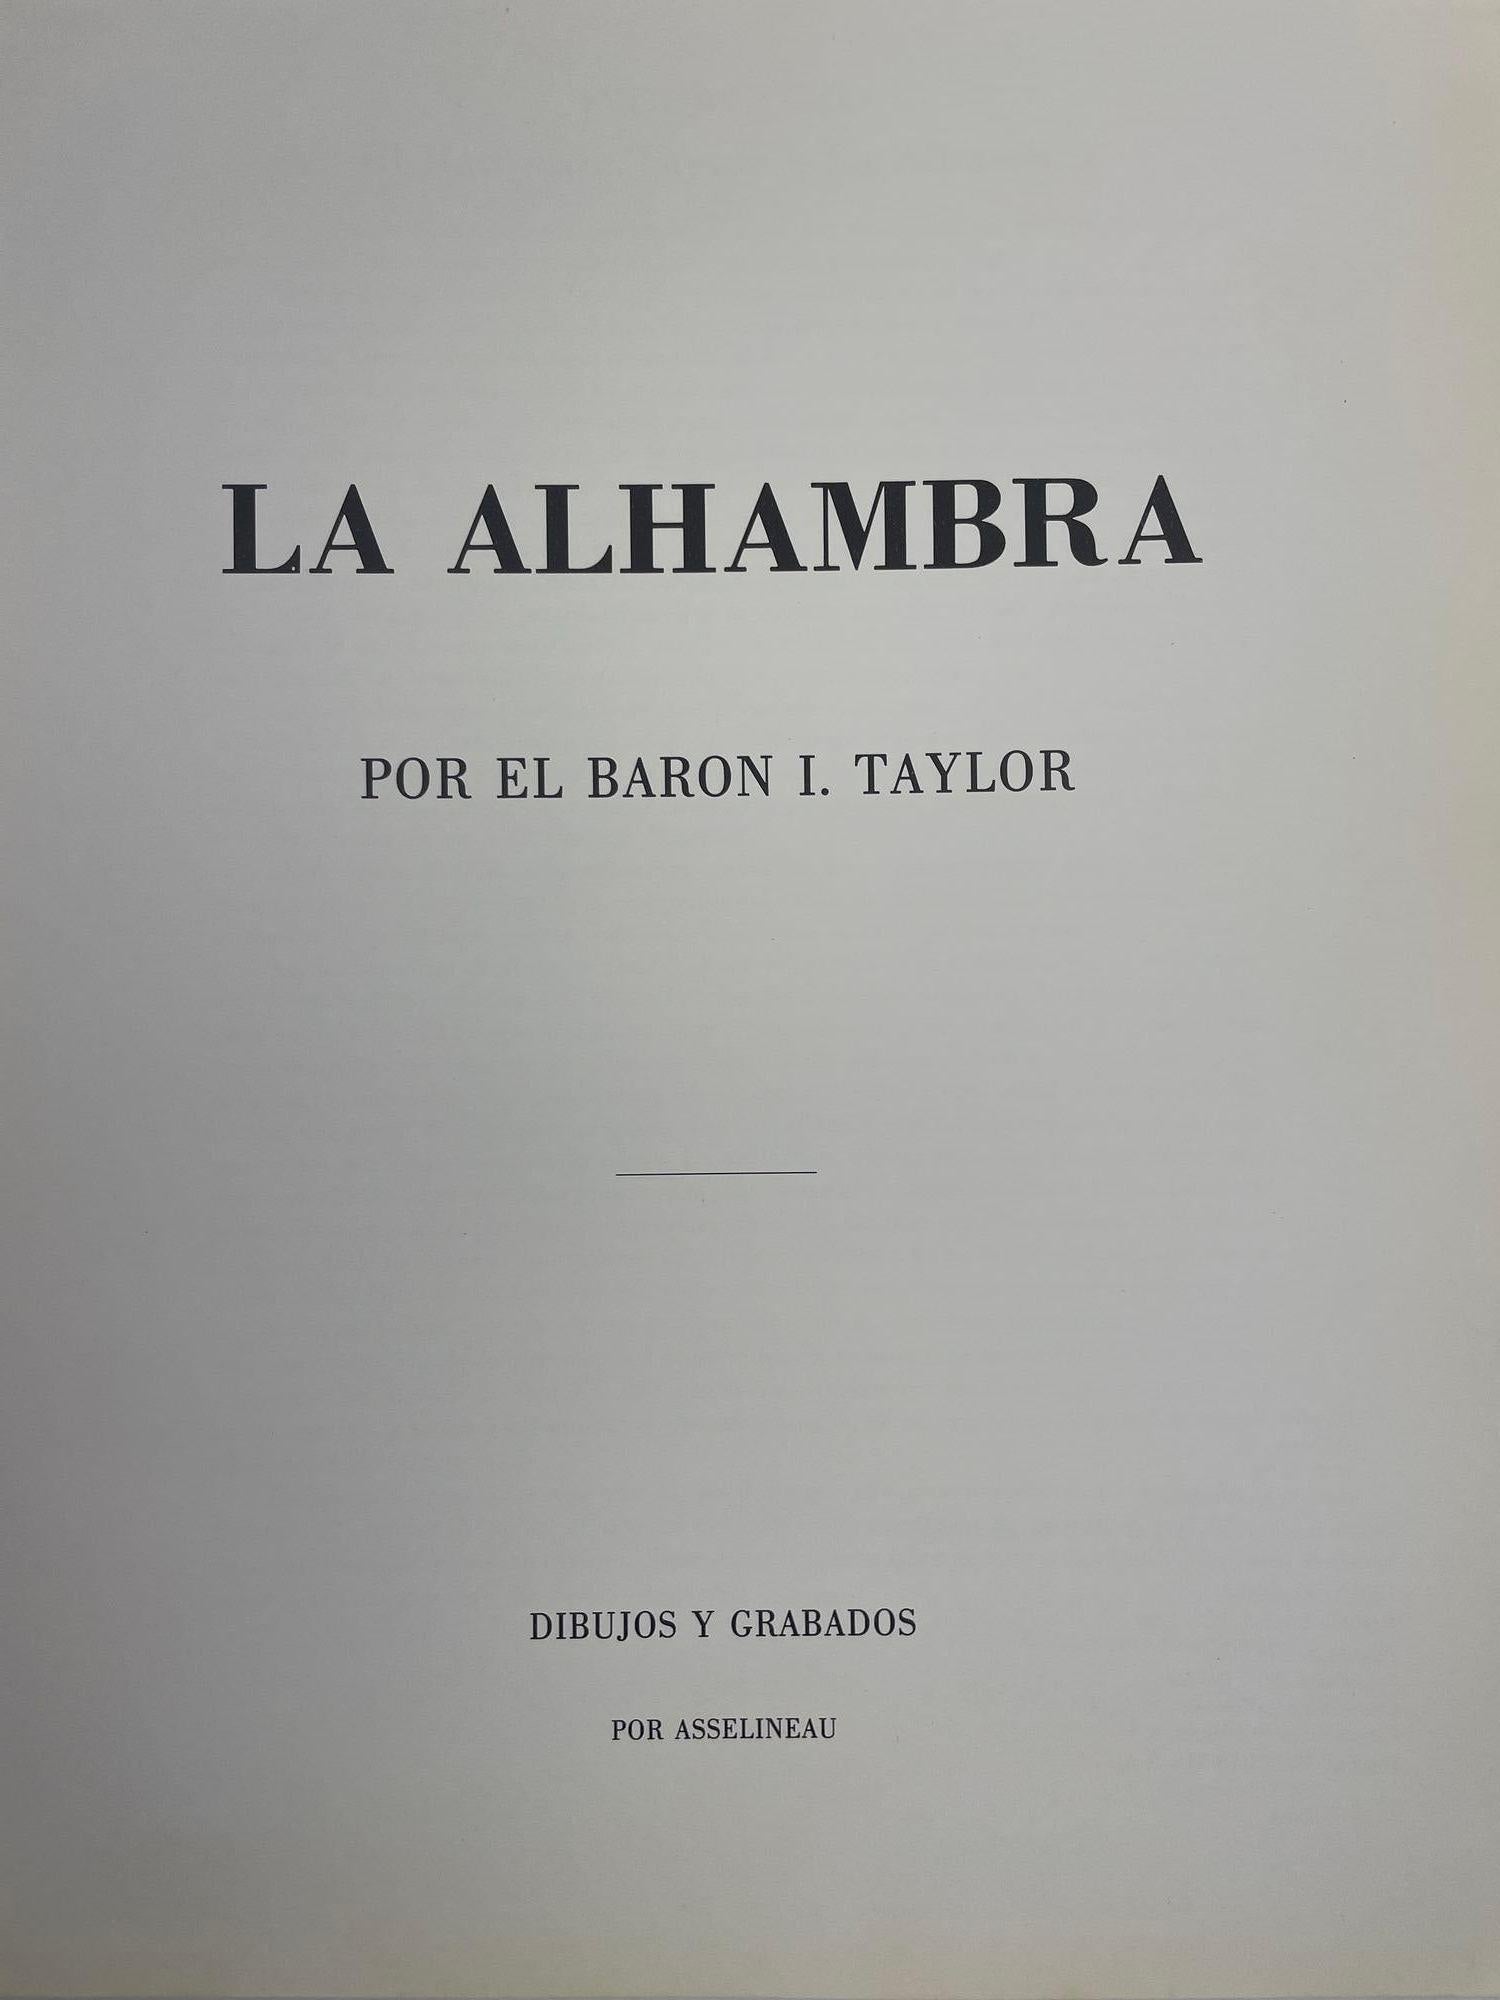 La Alhambra by Isidore Severin-Justin baron de Taylor.
La Alhambra. The work for which Baron Taylor will always be remembered is his monumental publication Voyage pittoresque et romantiques dans l'ancienne France. Of the present work, numbered